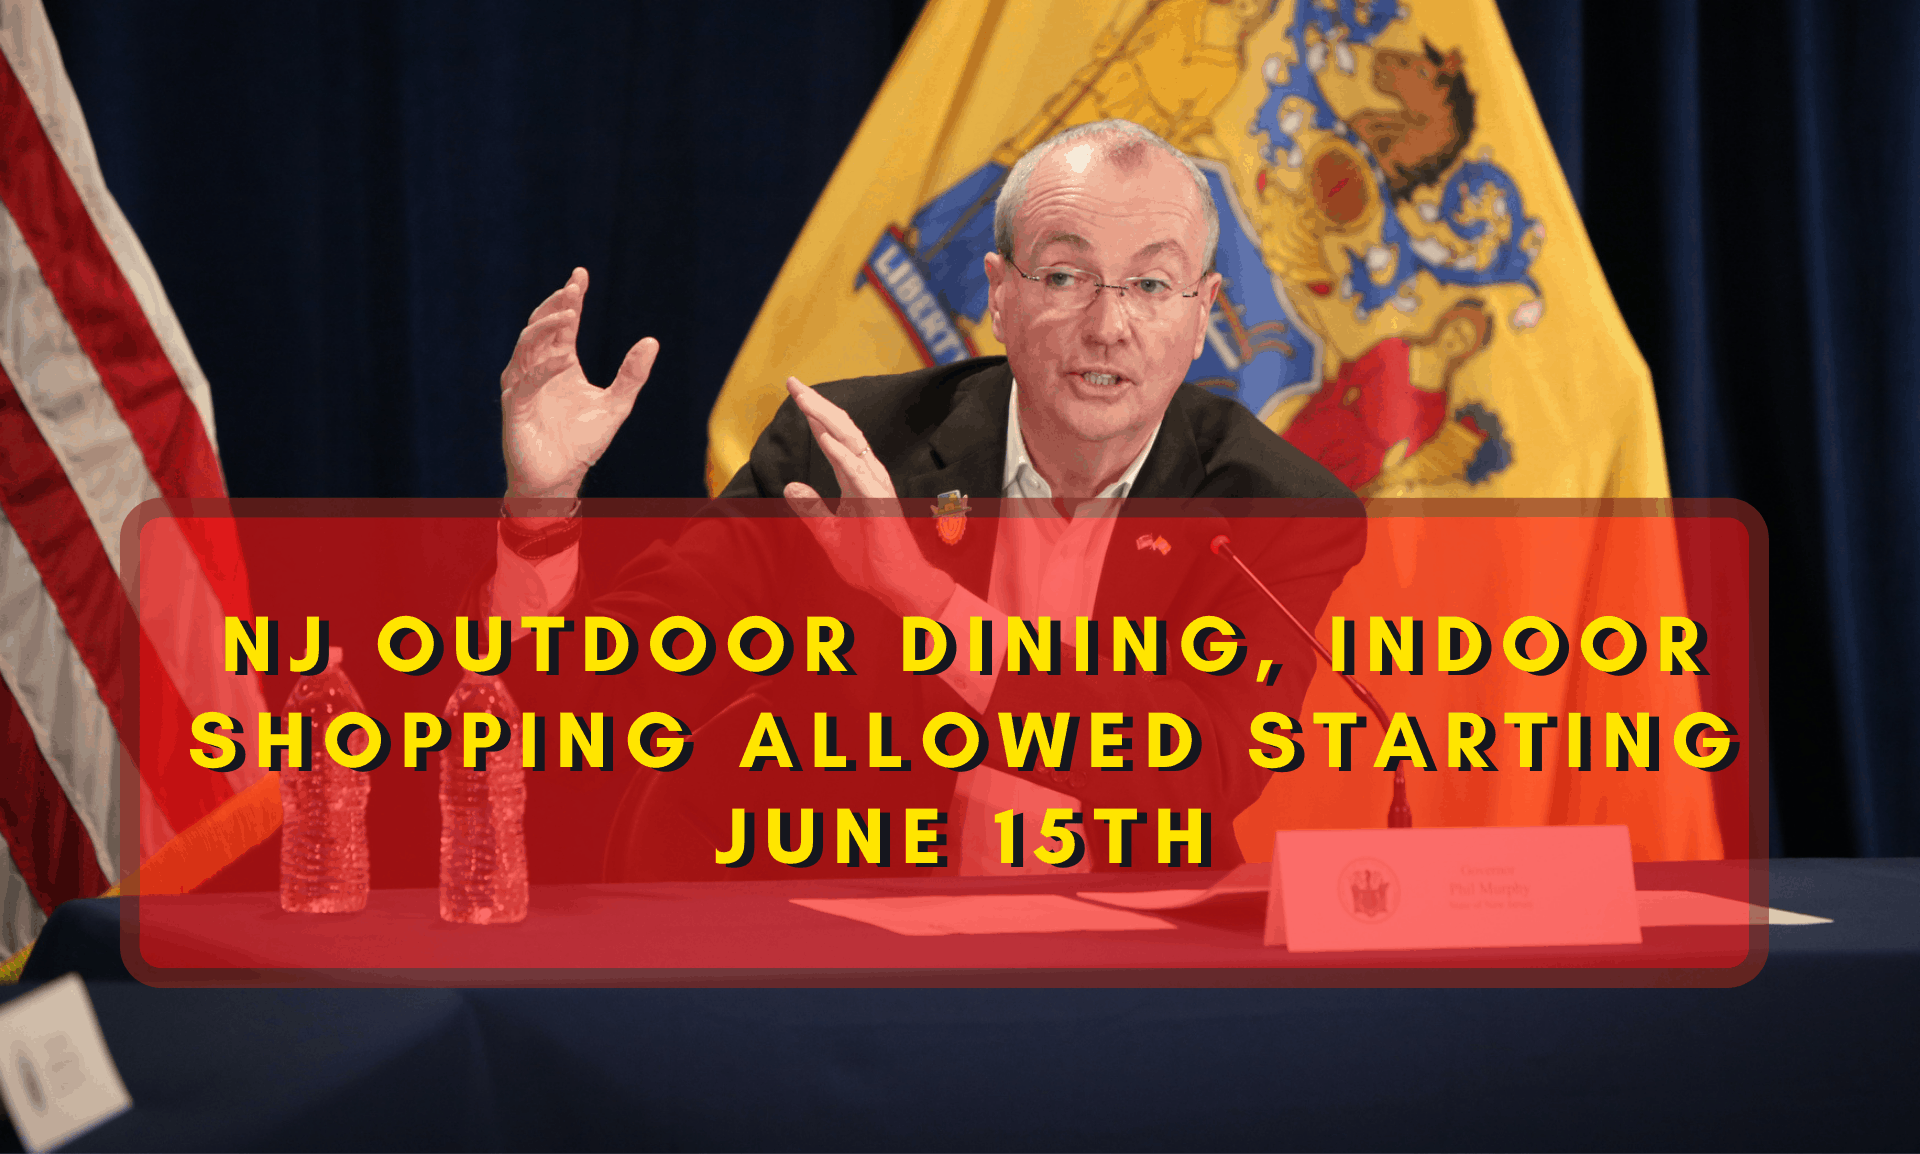 NJ Outdoor Dining, Indoor Shopping Allowed Starting June 15th